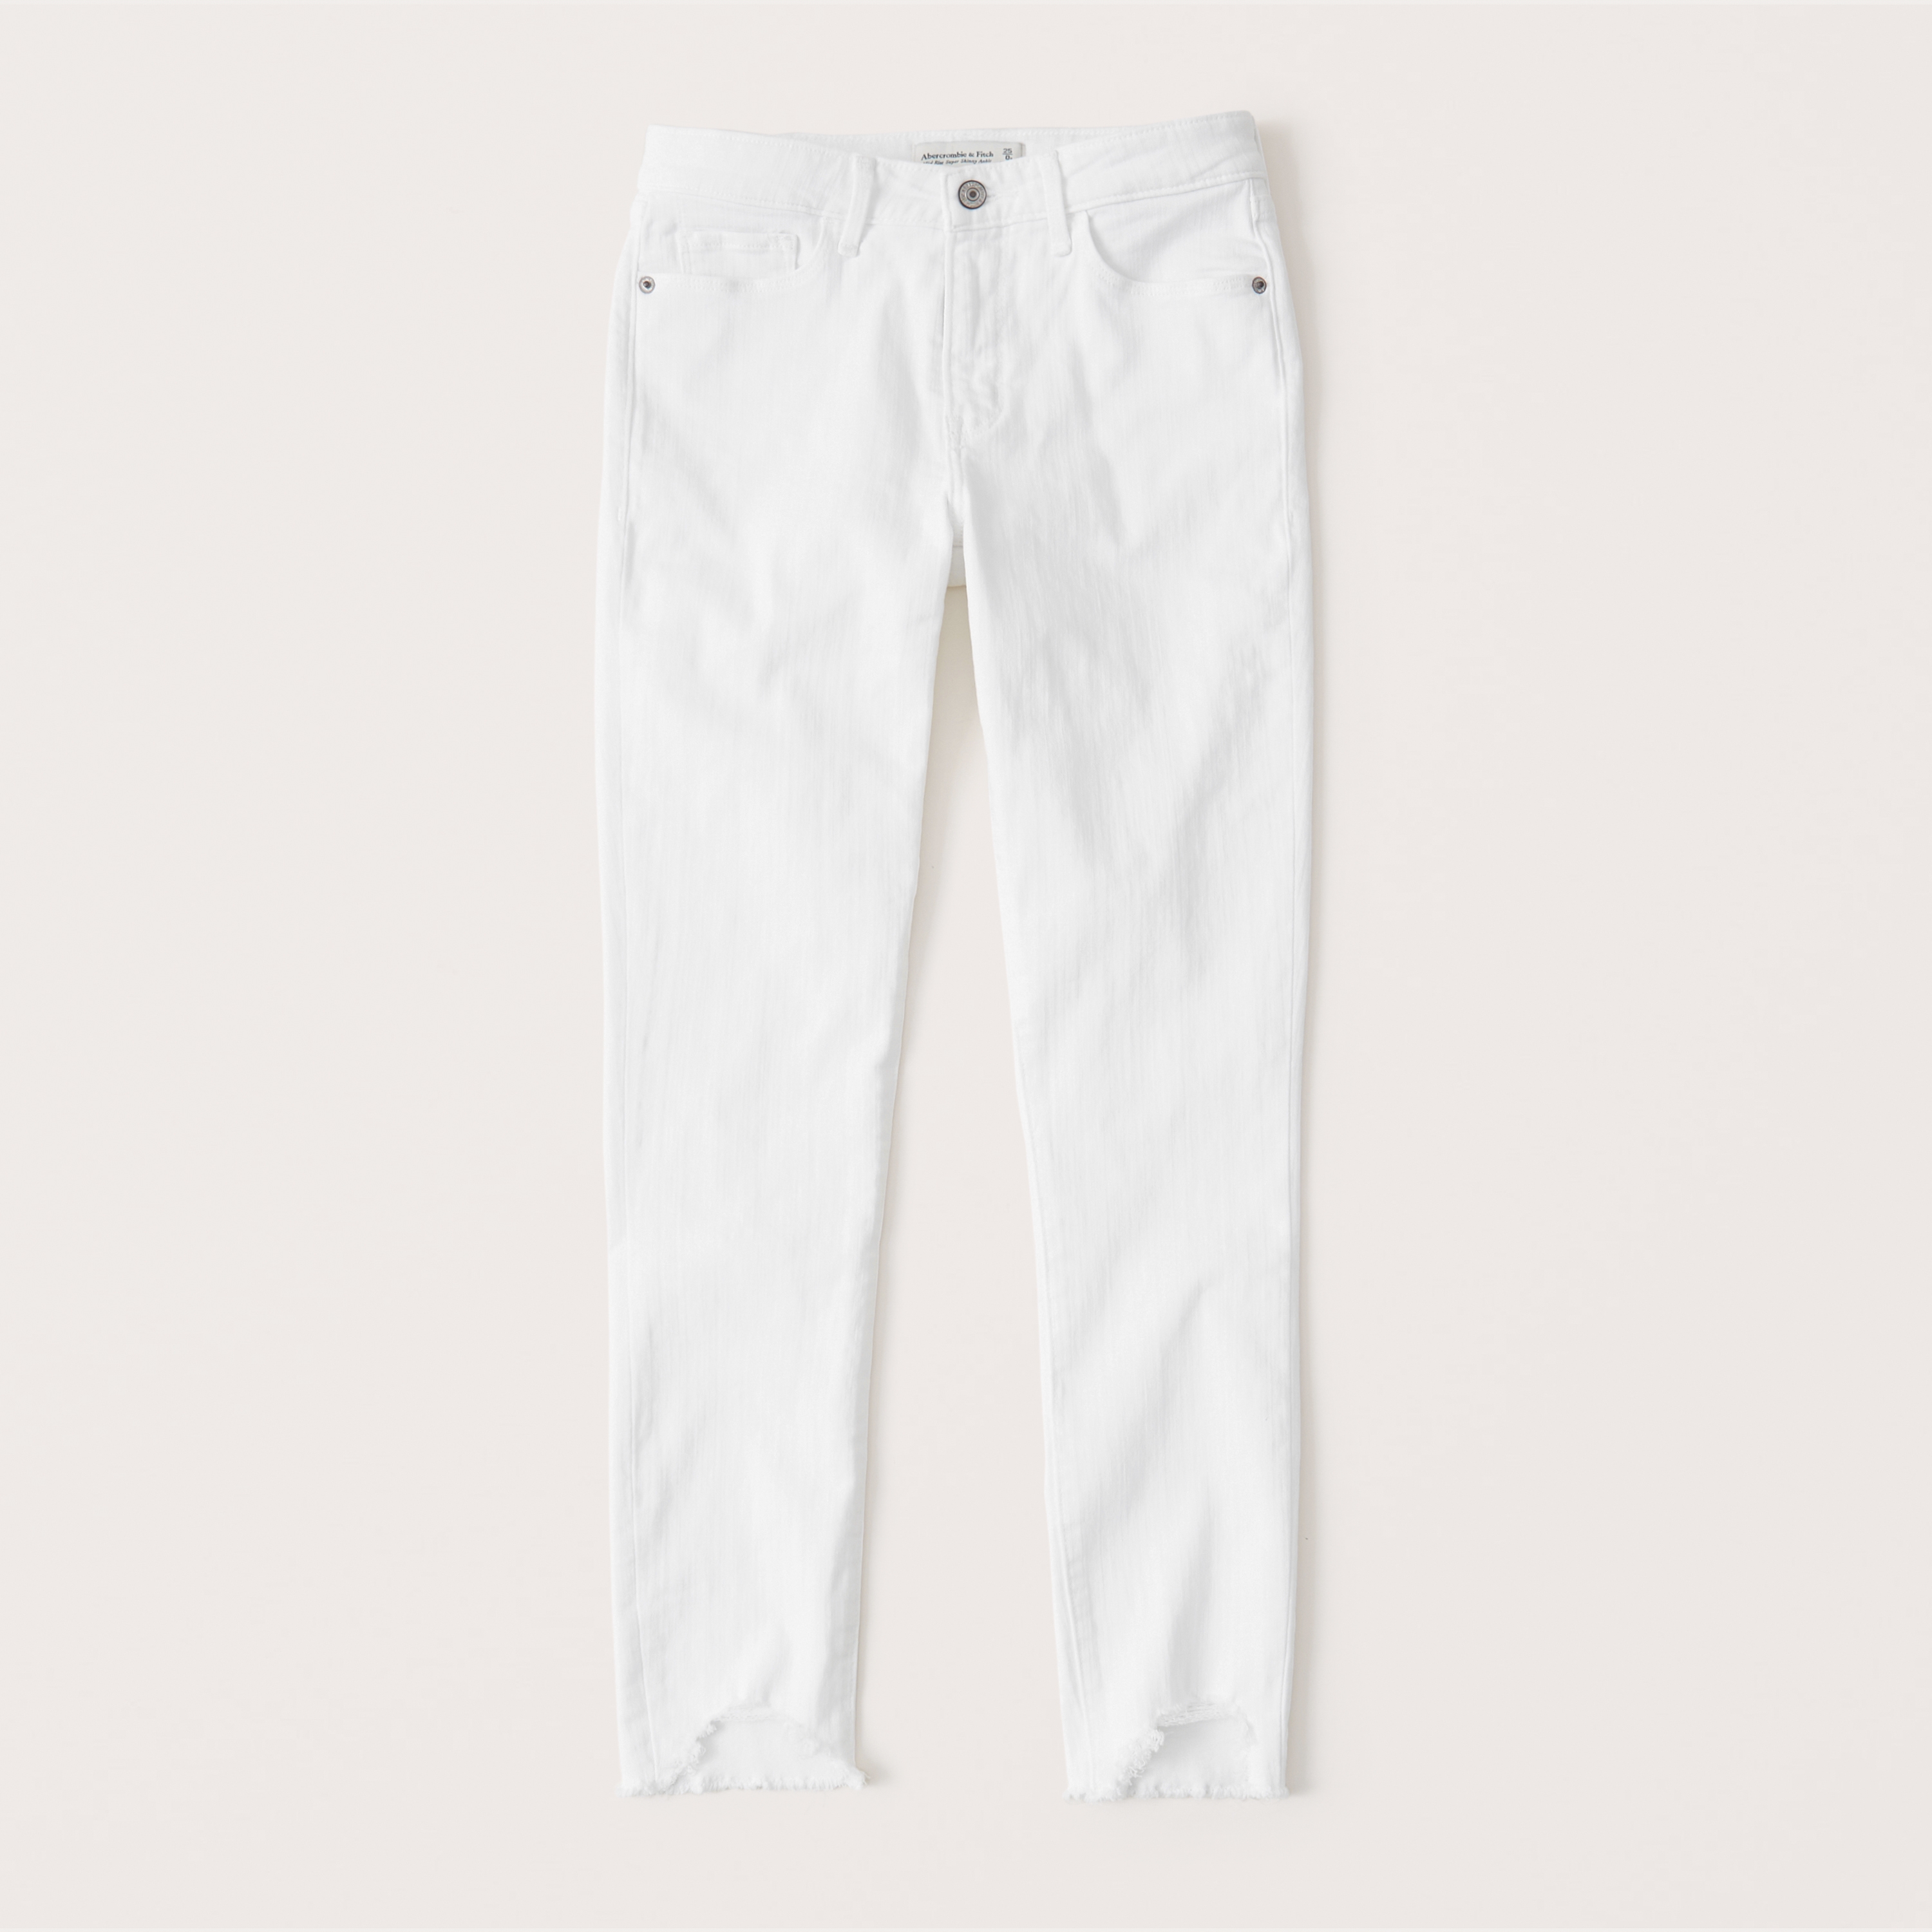 abercrombie fitch mid rise super skinny ankle jeans